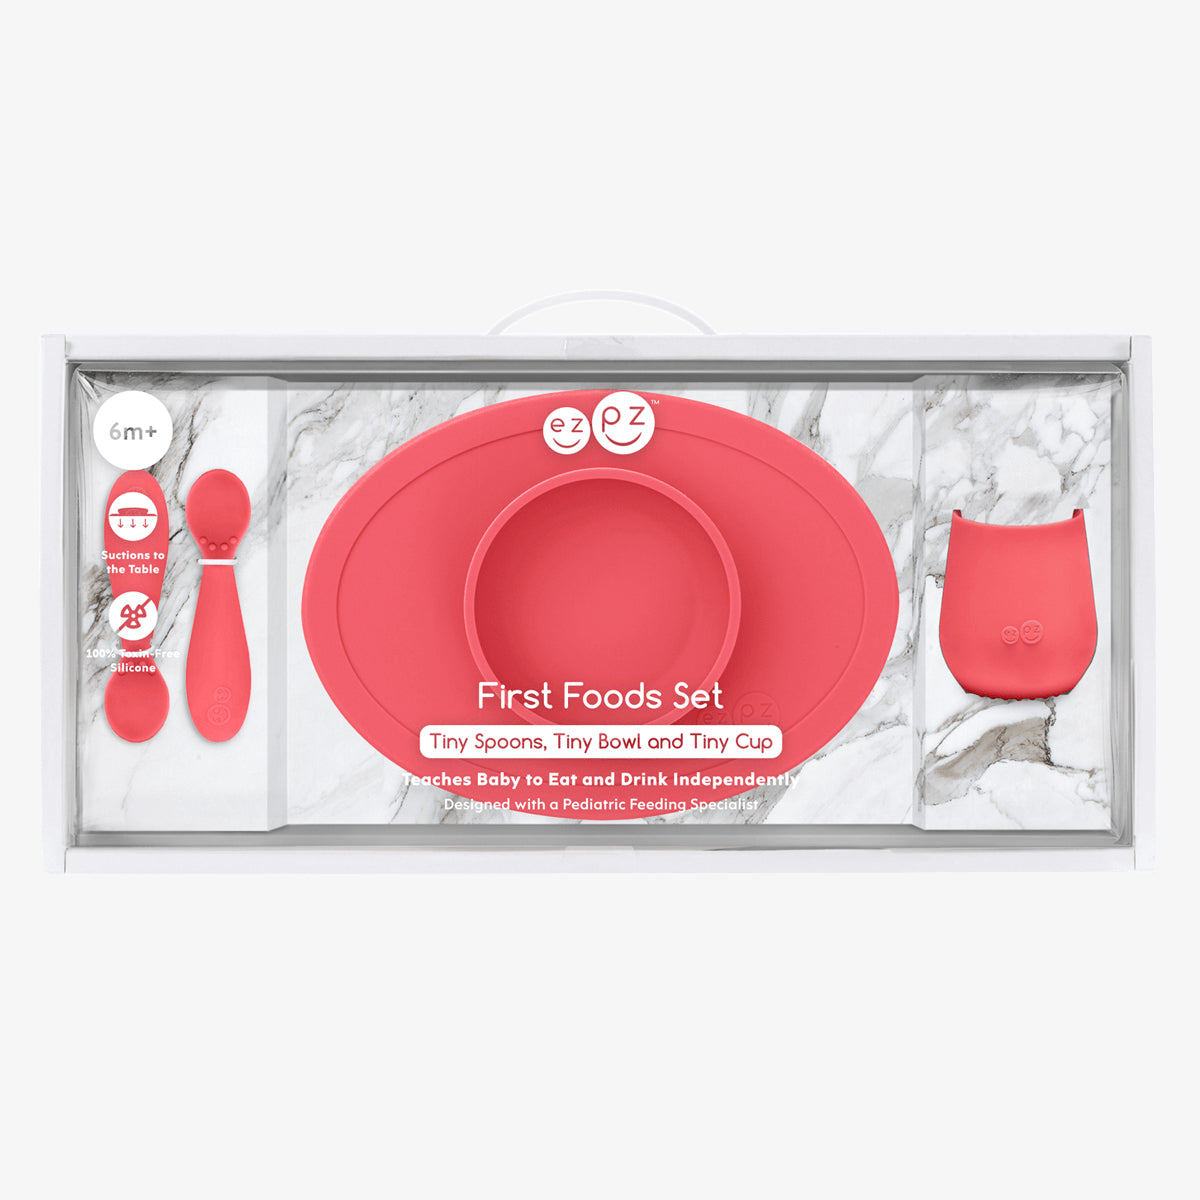 First Foods Set in Coral by ezpz / The Original All-In-One Silicone Plates & Placemats that Stick to the Table